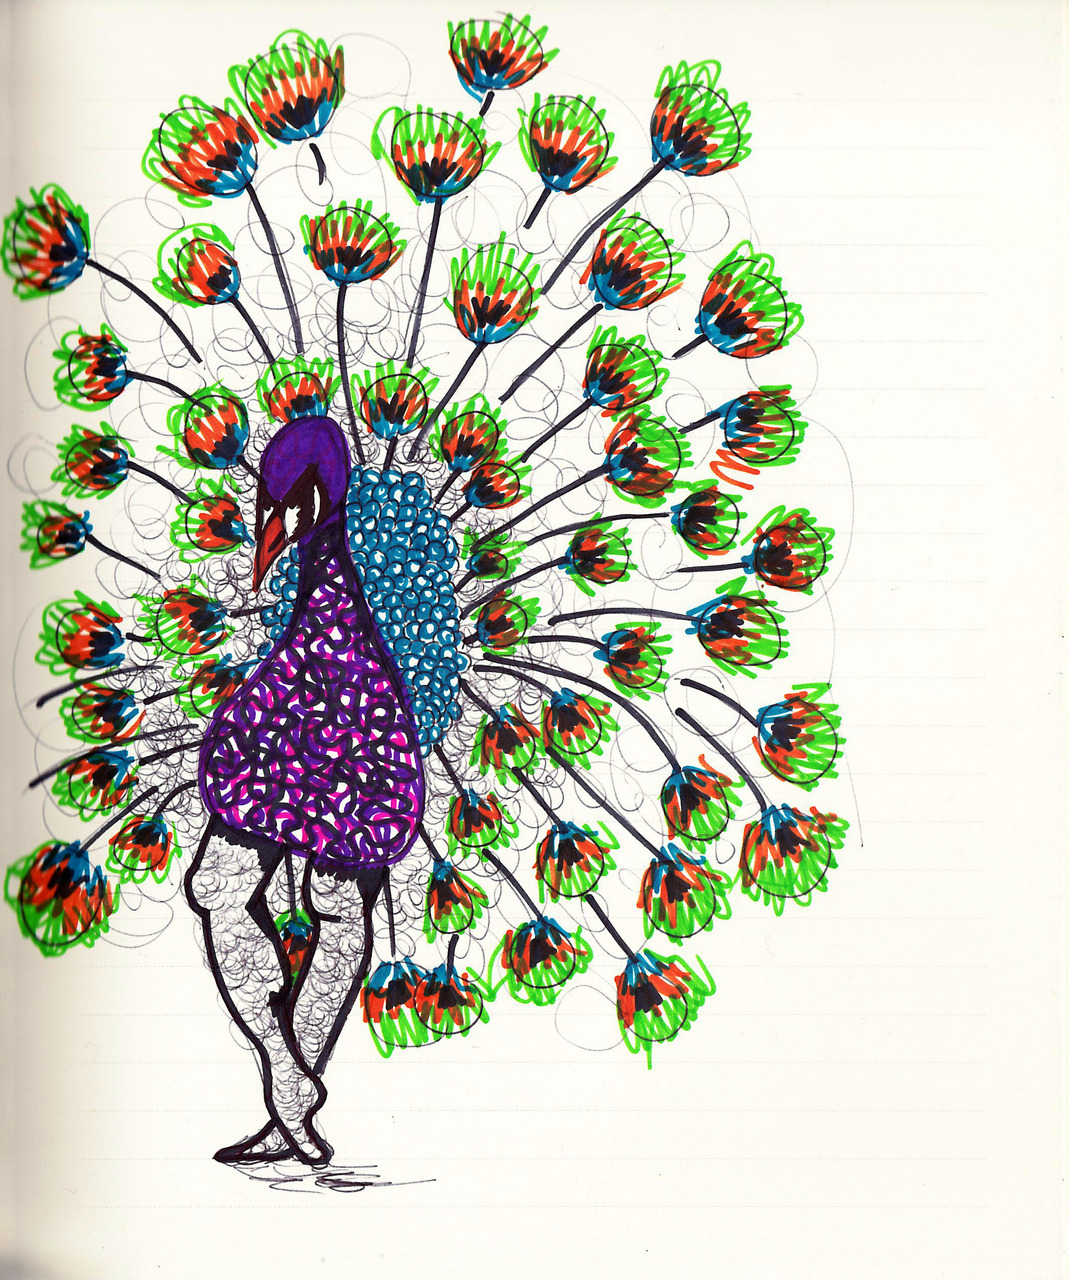 “Says the peacock.” This is my friend, Christian Kelly. He’s a peacock and those are clearly his legs. Drawn with a ball-point pen and markers.